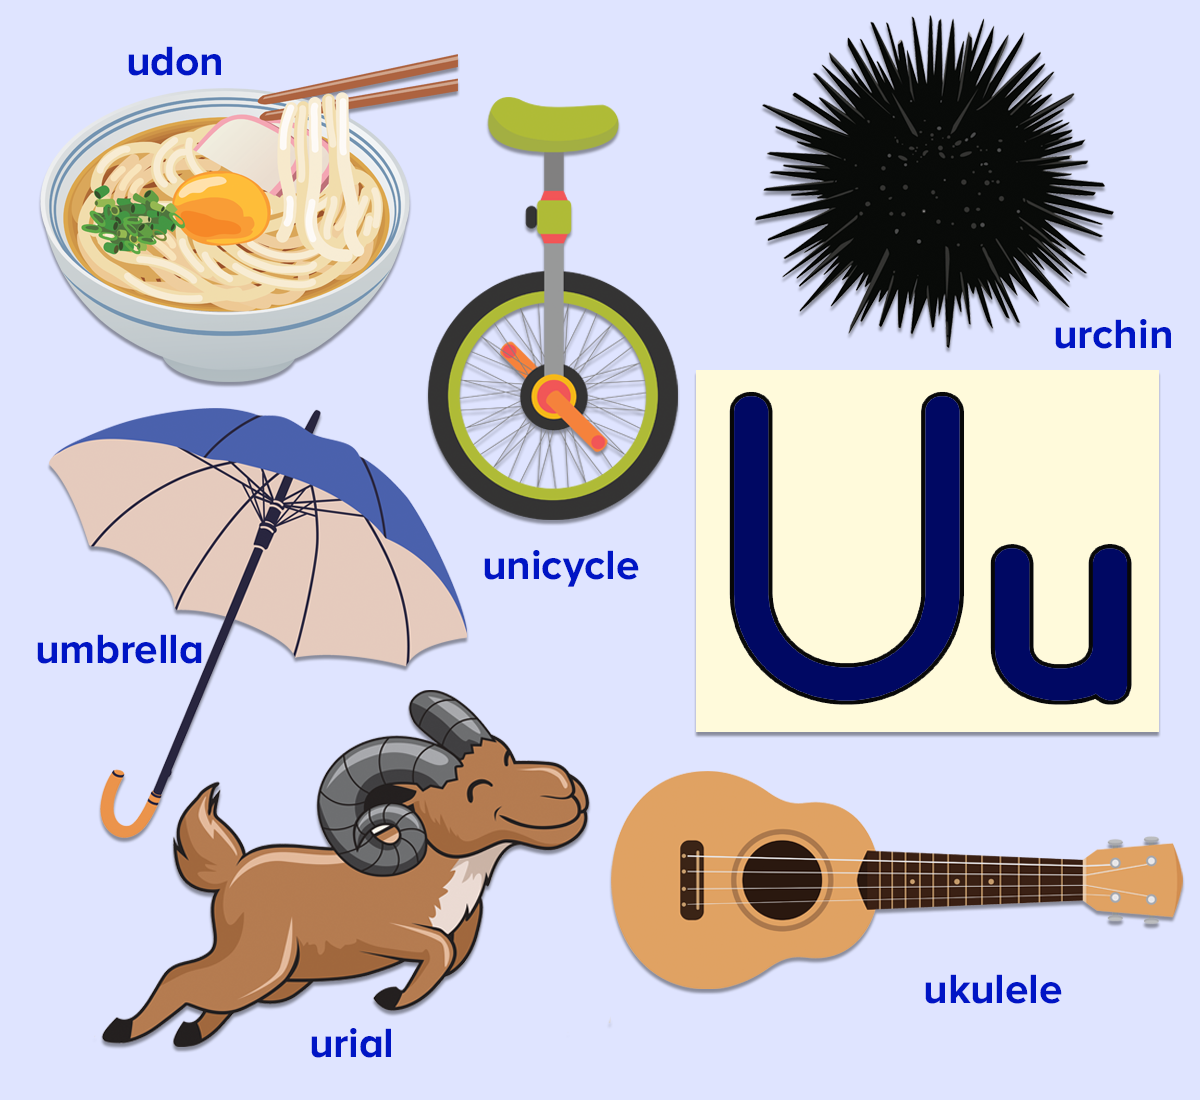 Free printable list of words that start with the letter U for kids. Udon, urchin, unicycle, umbrella, urial, ukulele. 